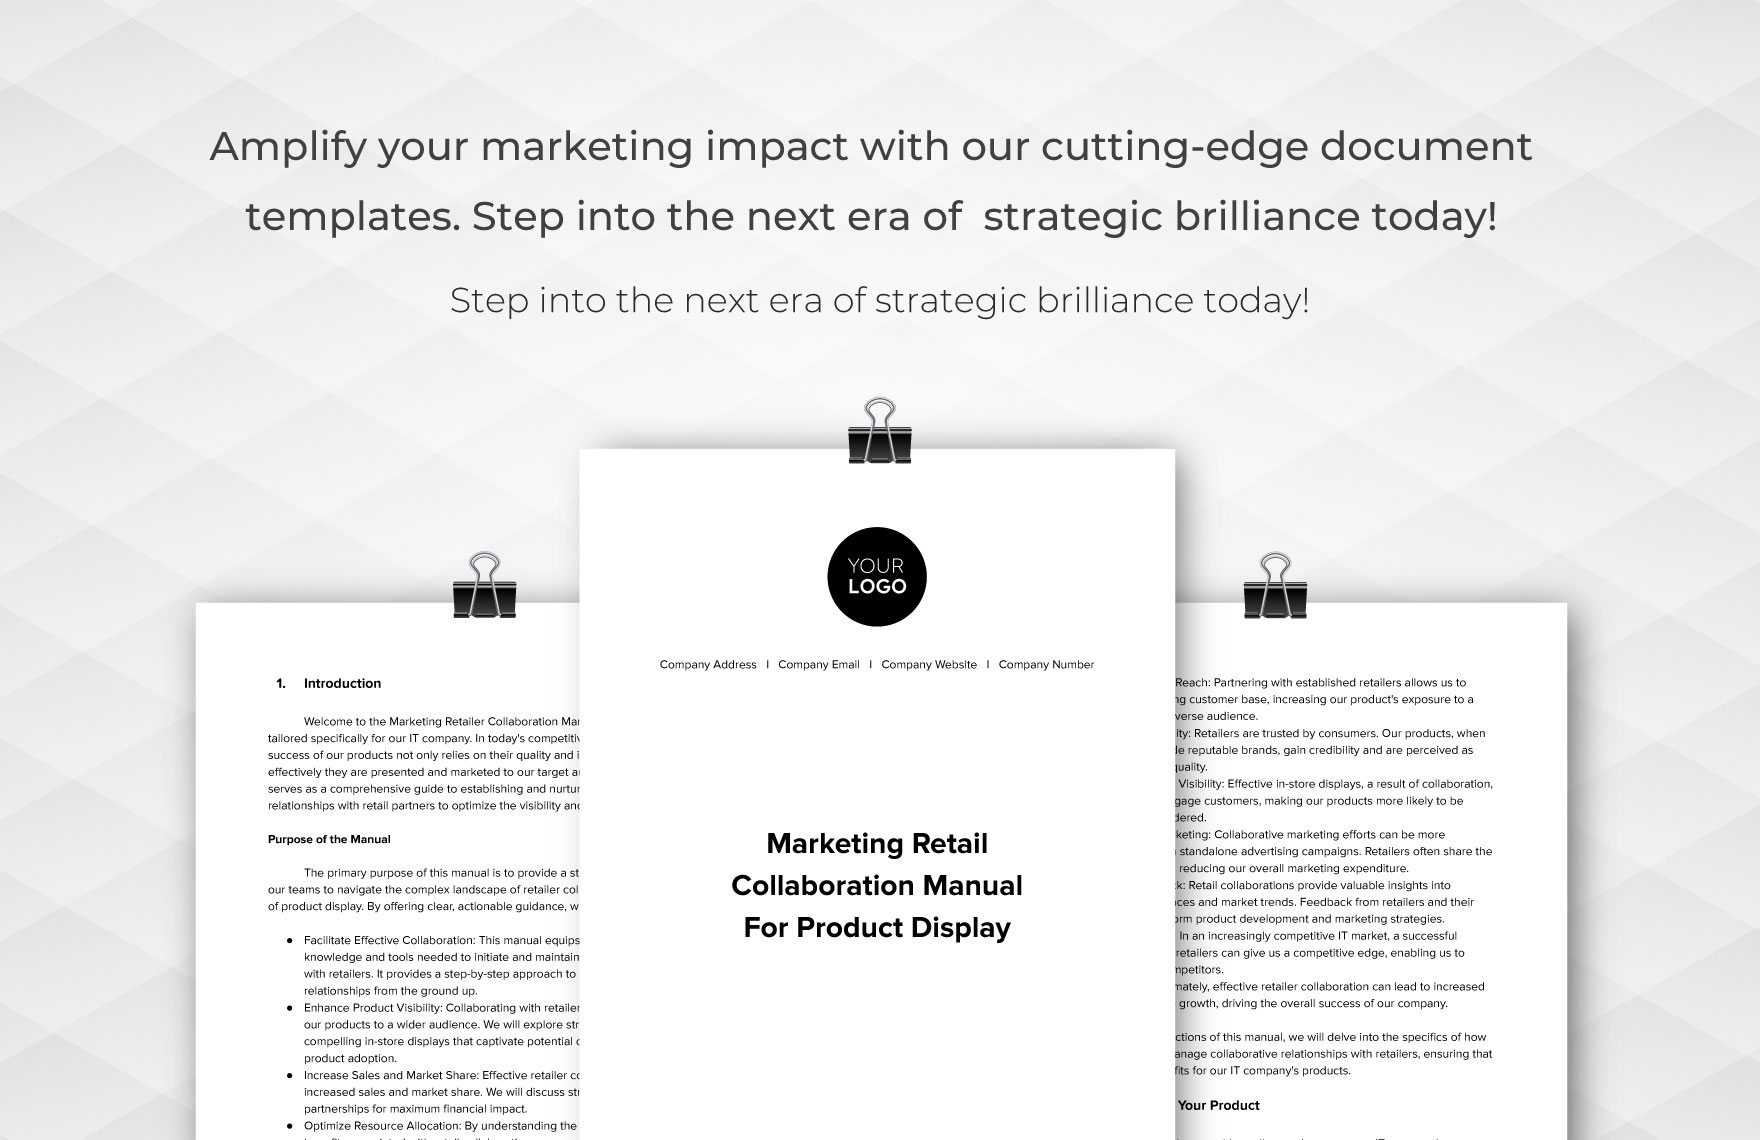 Marketing Retailer Collaboration Manual for Product Display Template